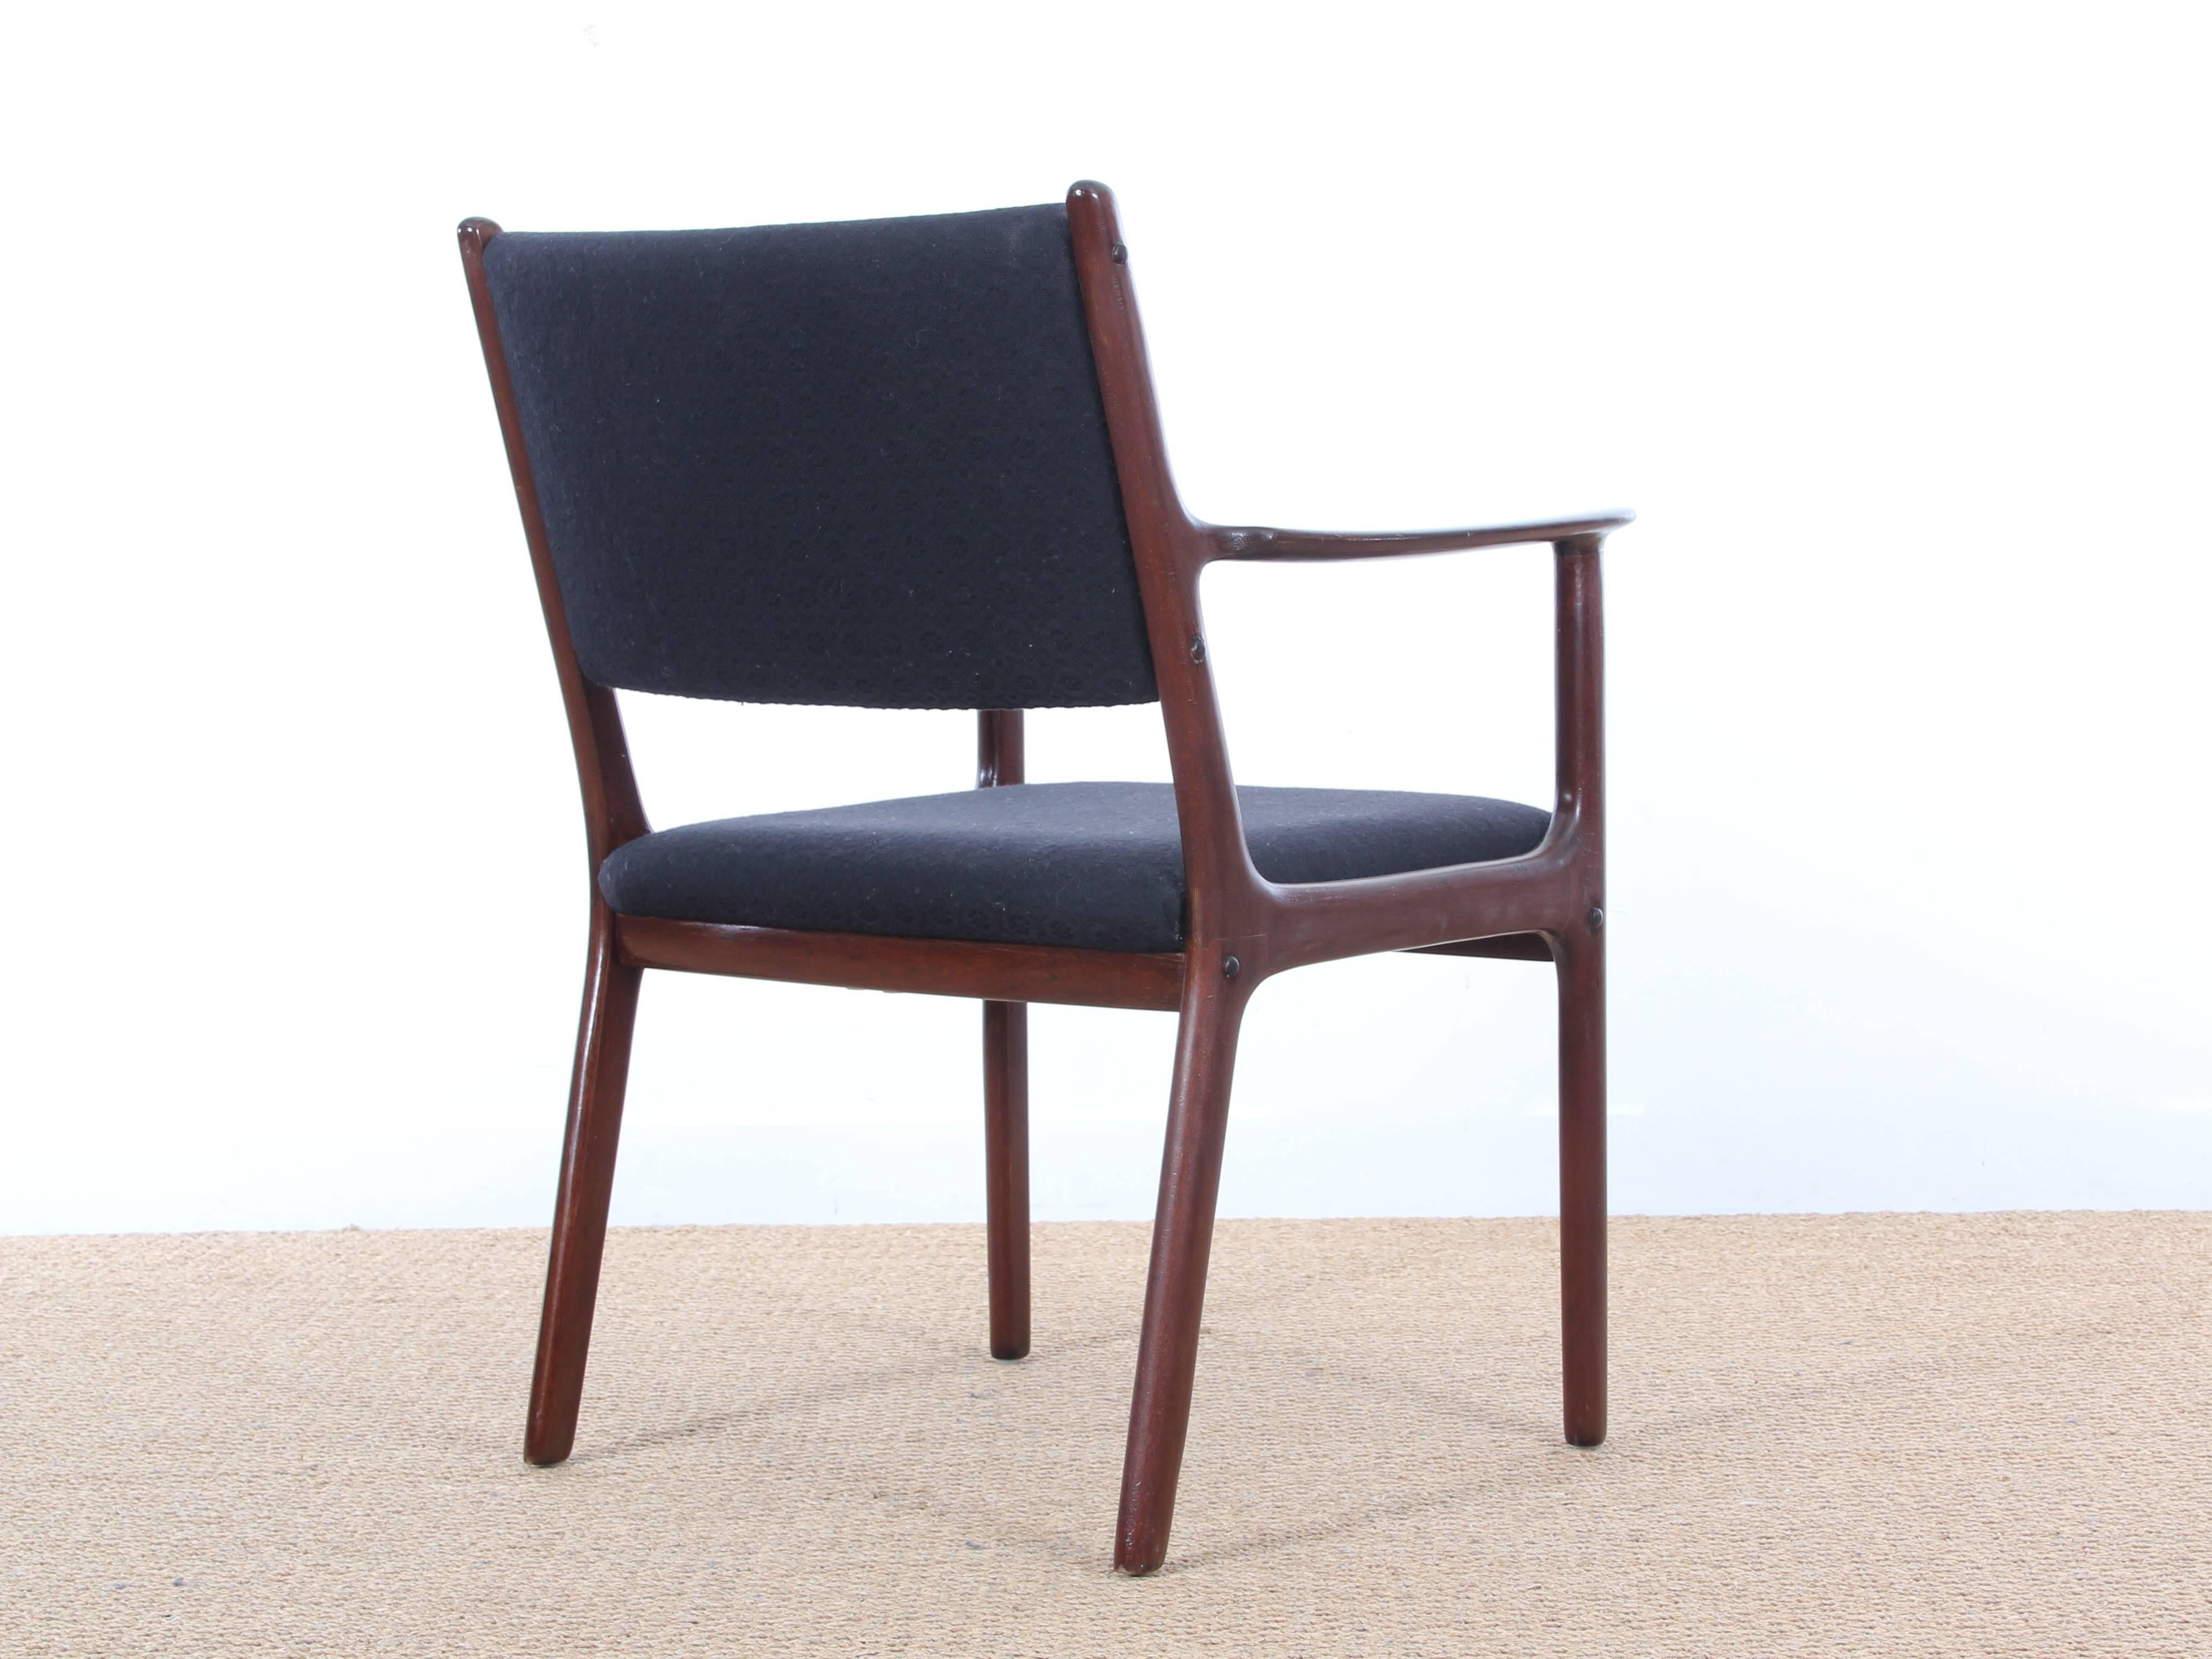 Mid-20th Century Mid-Century Modern Pair of Armchairs in Mahogany Model PJ-412 by Ole Wanscher